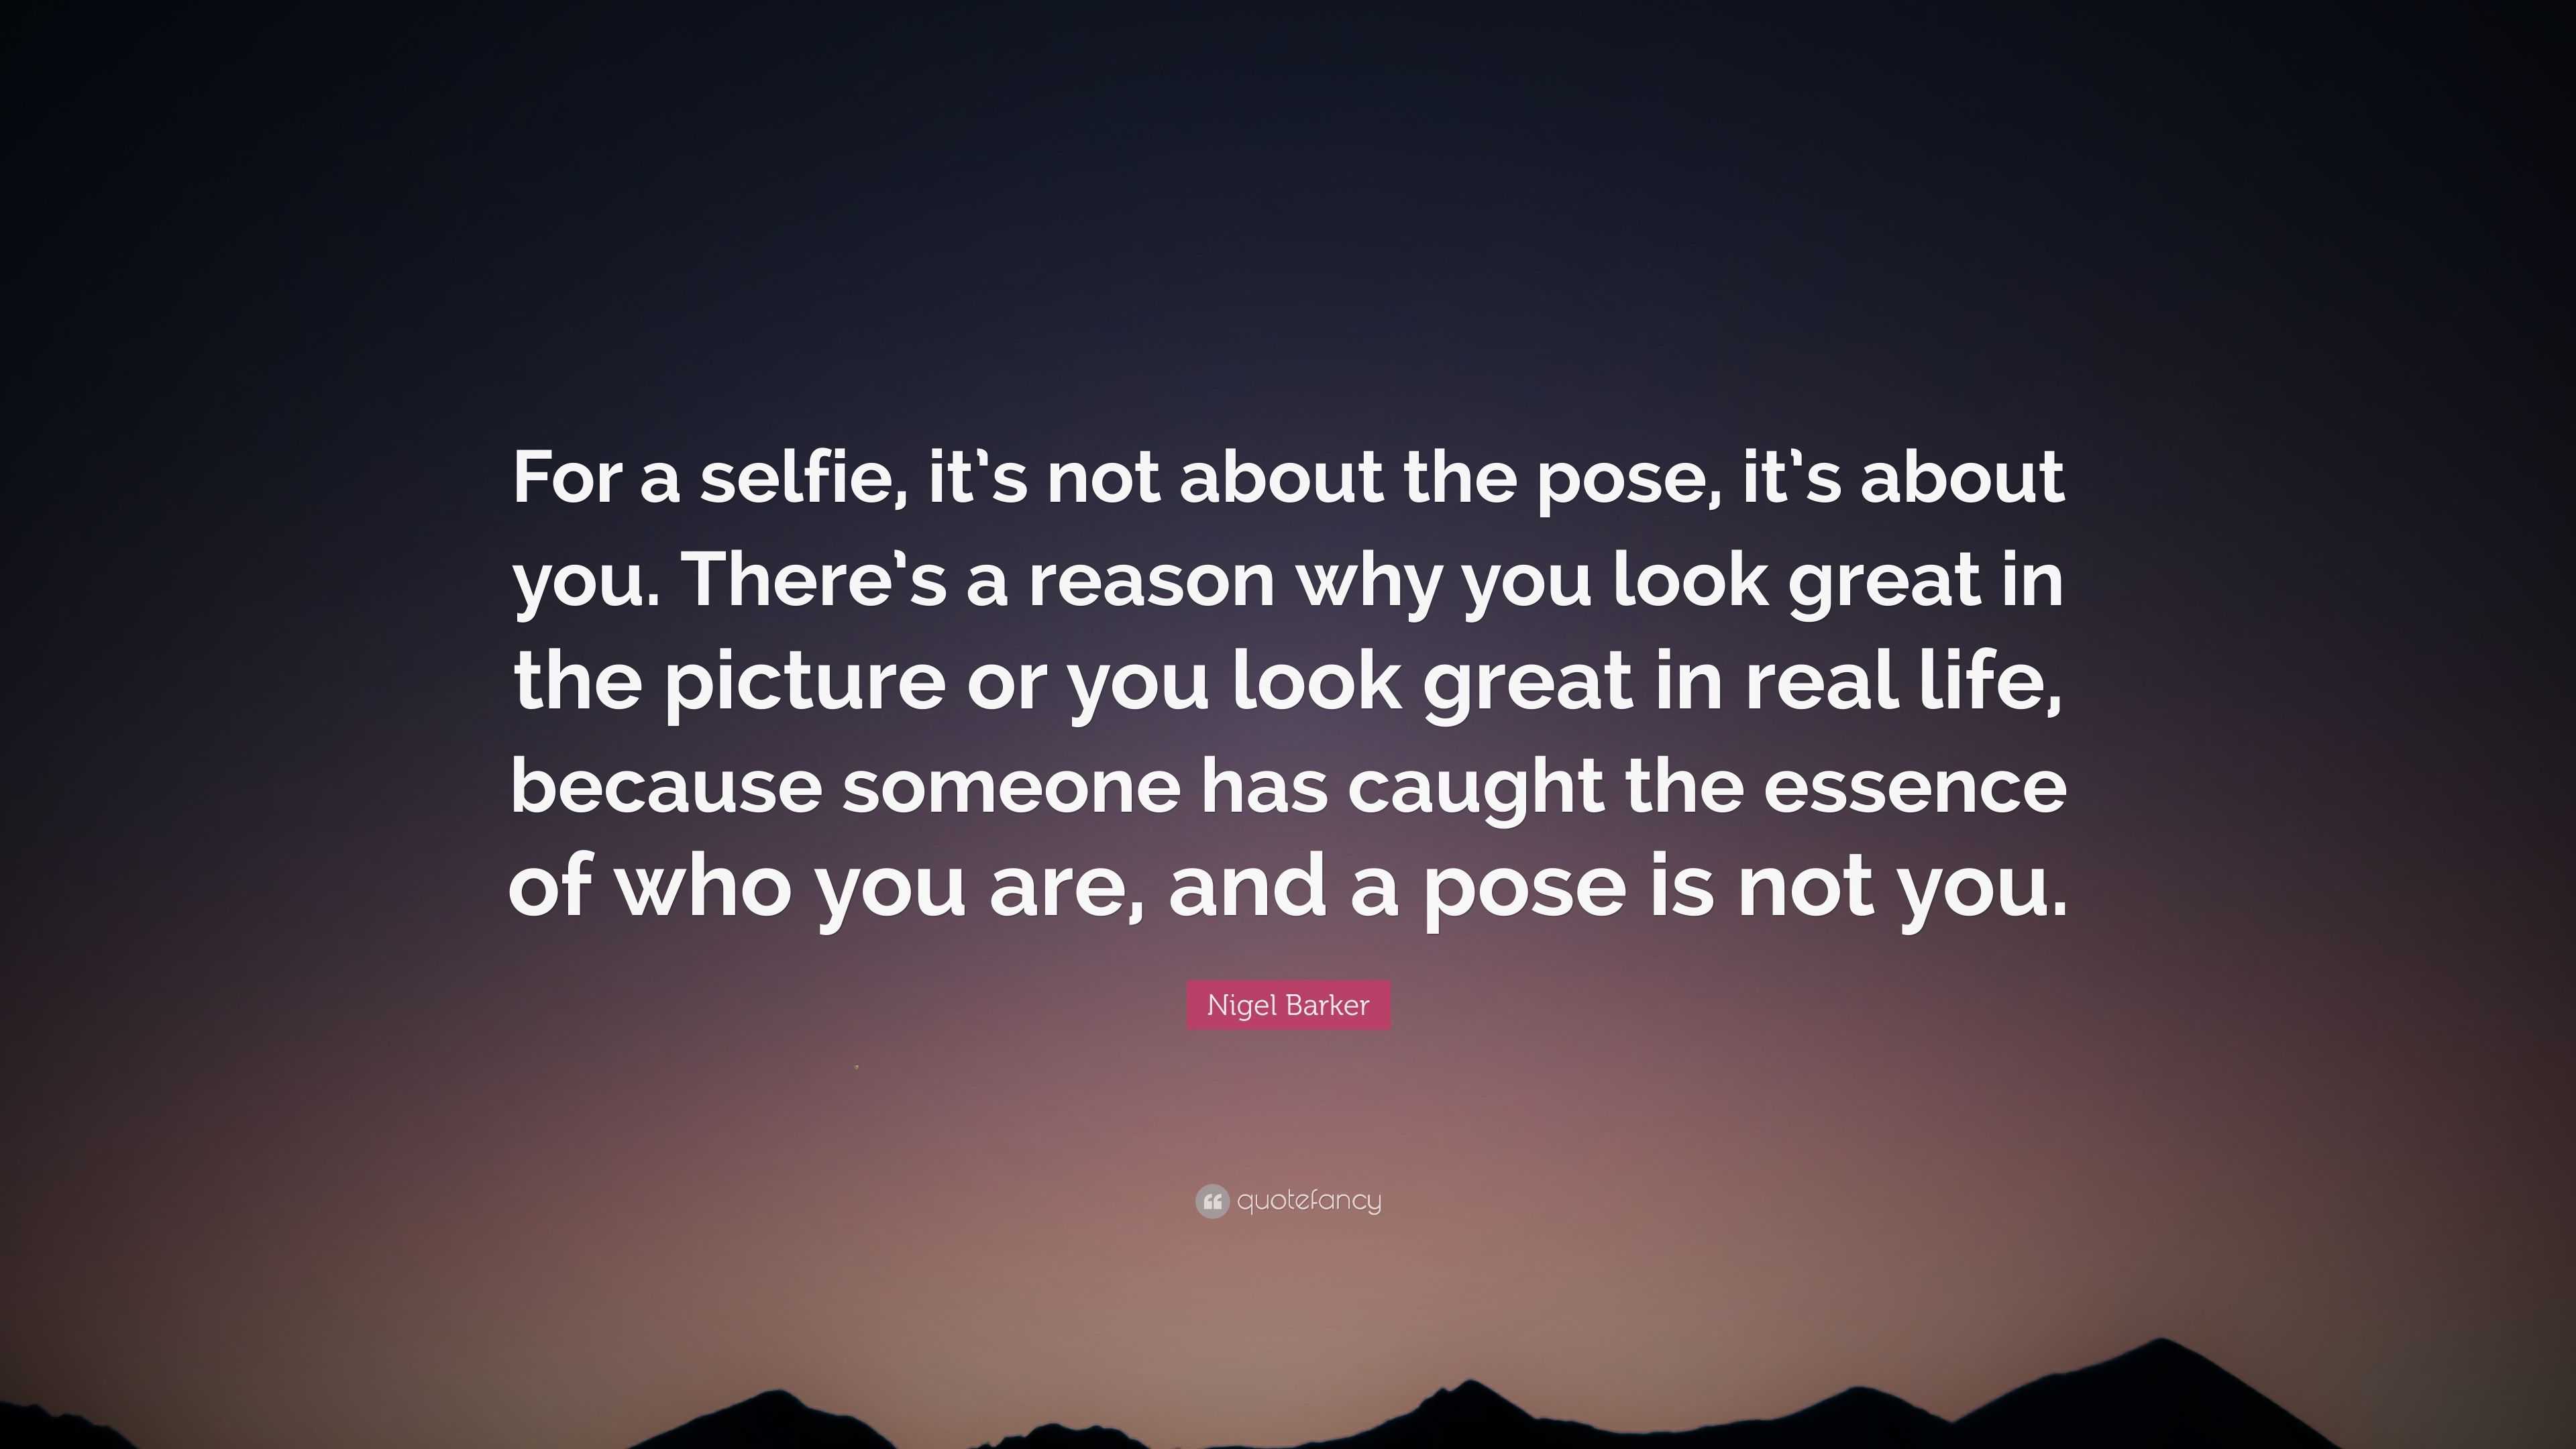 Nigel Barker Quote: “For a selfie, it's not about the pose, it's about you.  There's a reason why you look great in the picture or you look gr...”